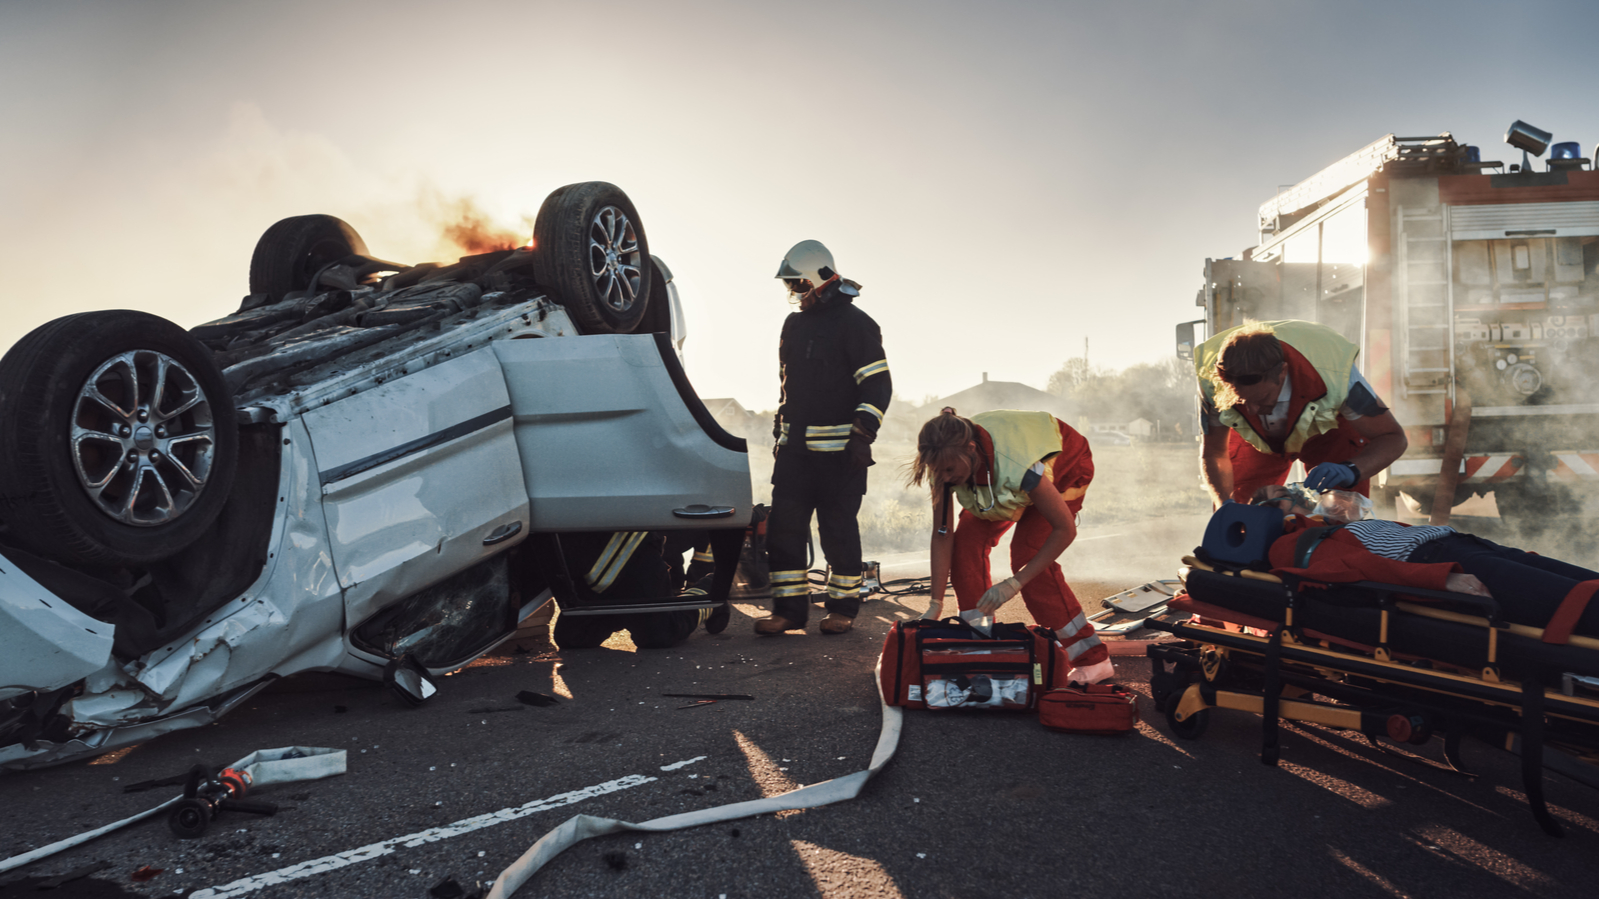 Truck Accident Law Firm in Bartlett, IL | Bartlett, IL Truck Accident Lawyer | Burger Law